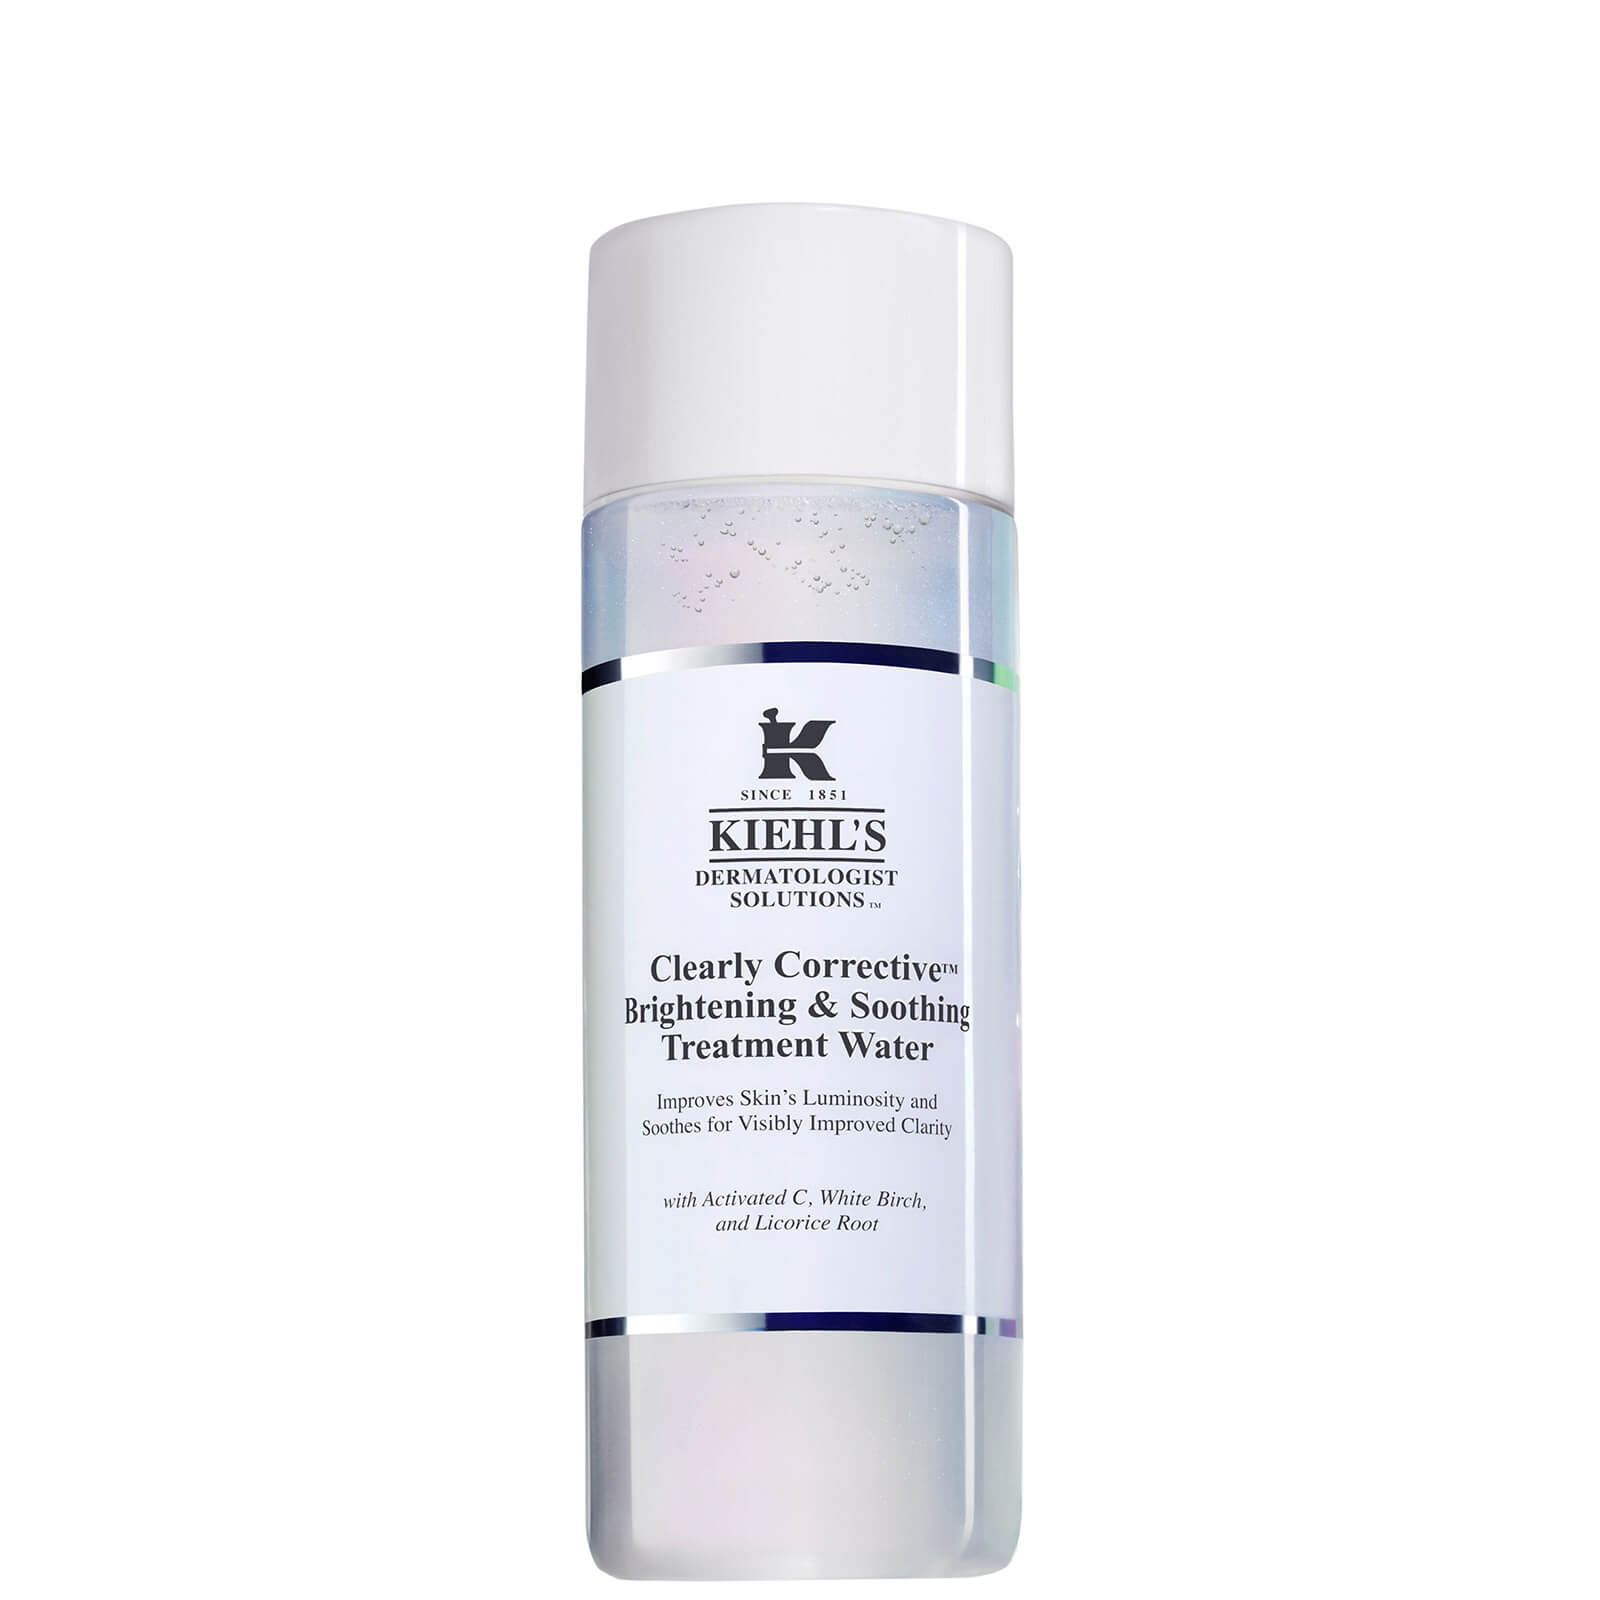 Photos - Facial / Body Cleansing Product Kiehls Kiehl's Clearly Corrective Brightening and Soothing Treatment Water 200ml 